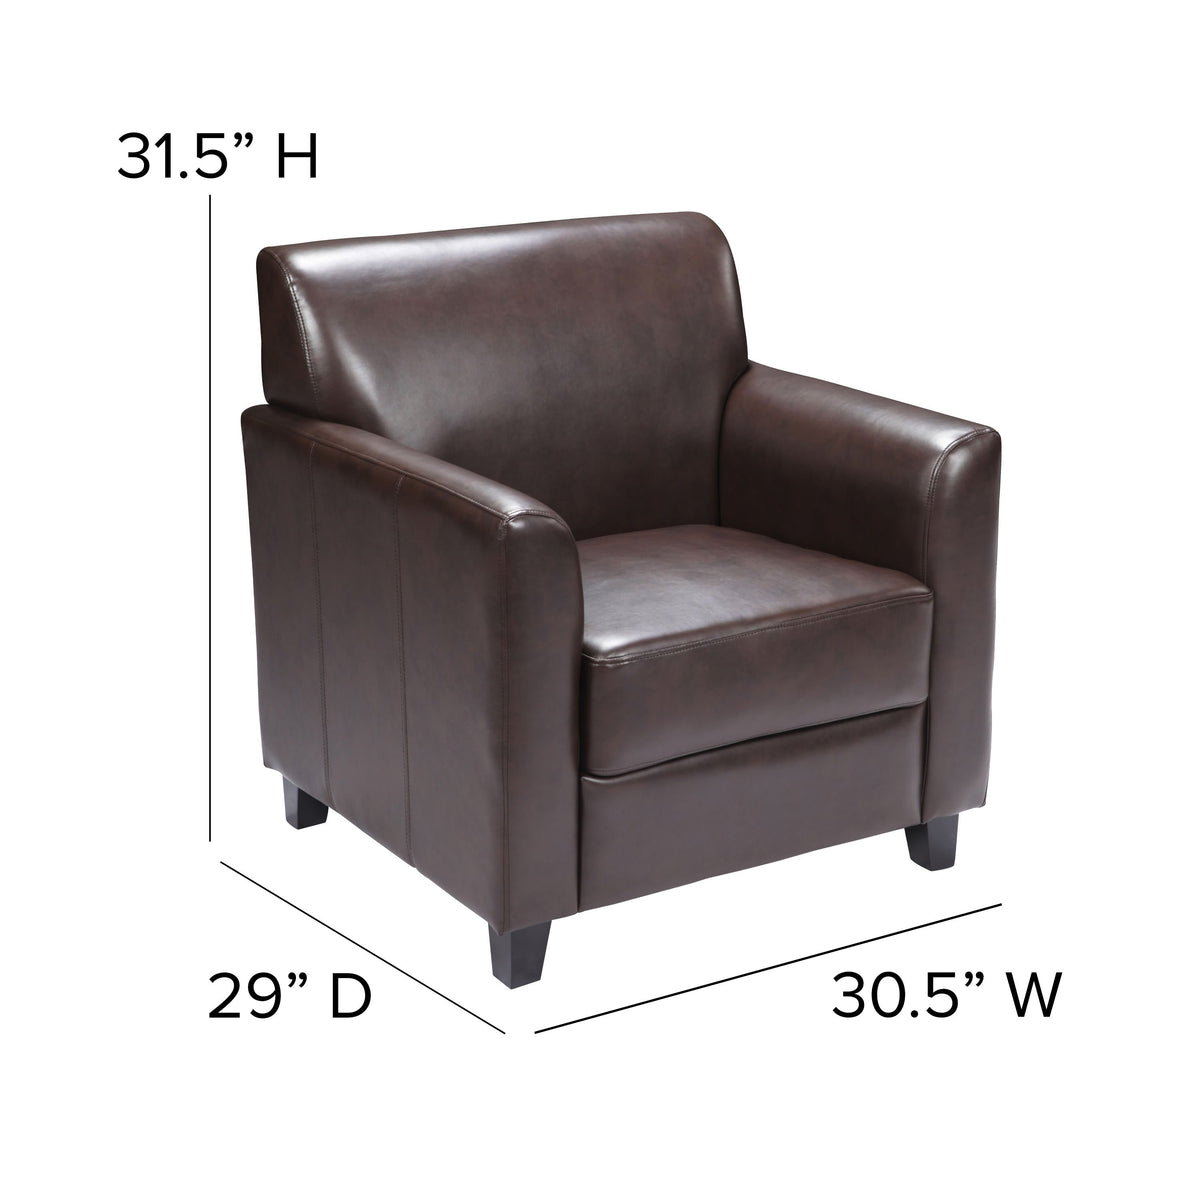 Brown |#| Brown LeatherSoft Chair with Clean Line Stitched Frame - Reception Seating